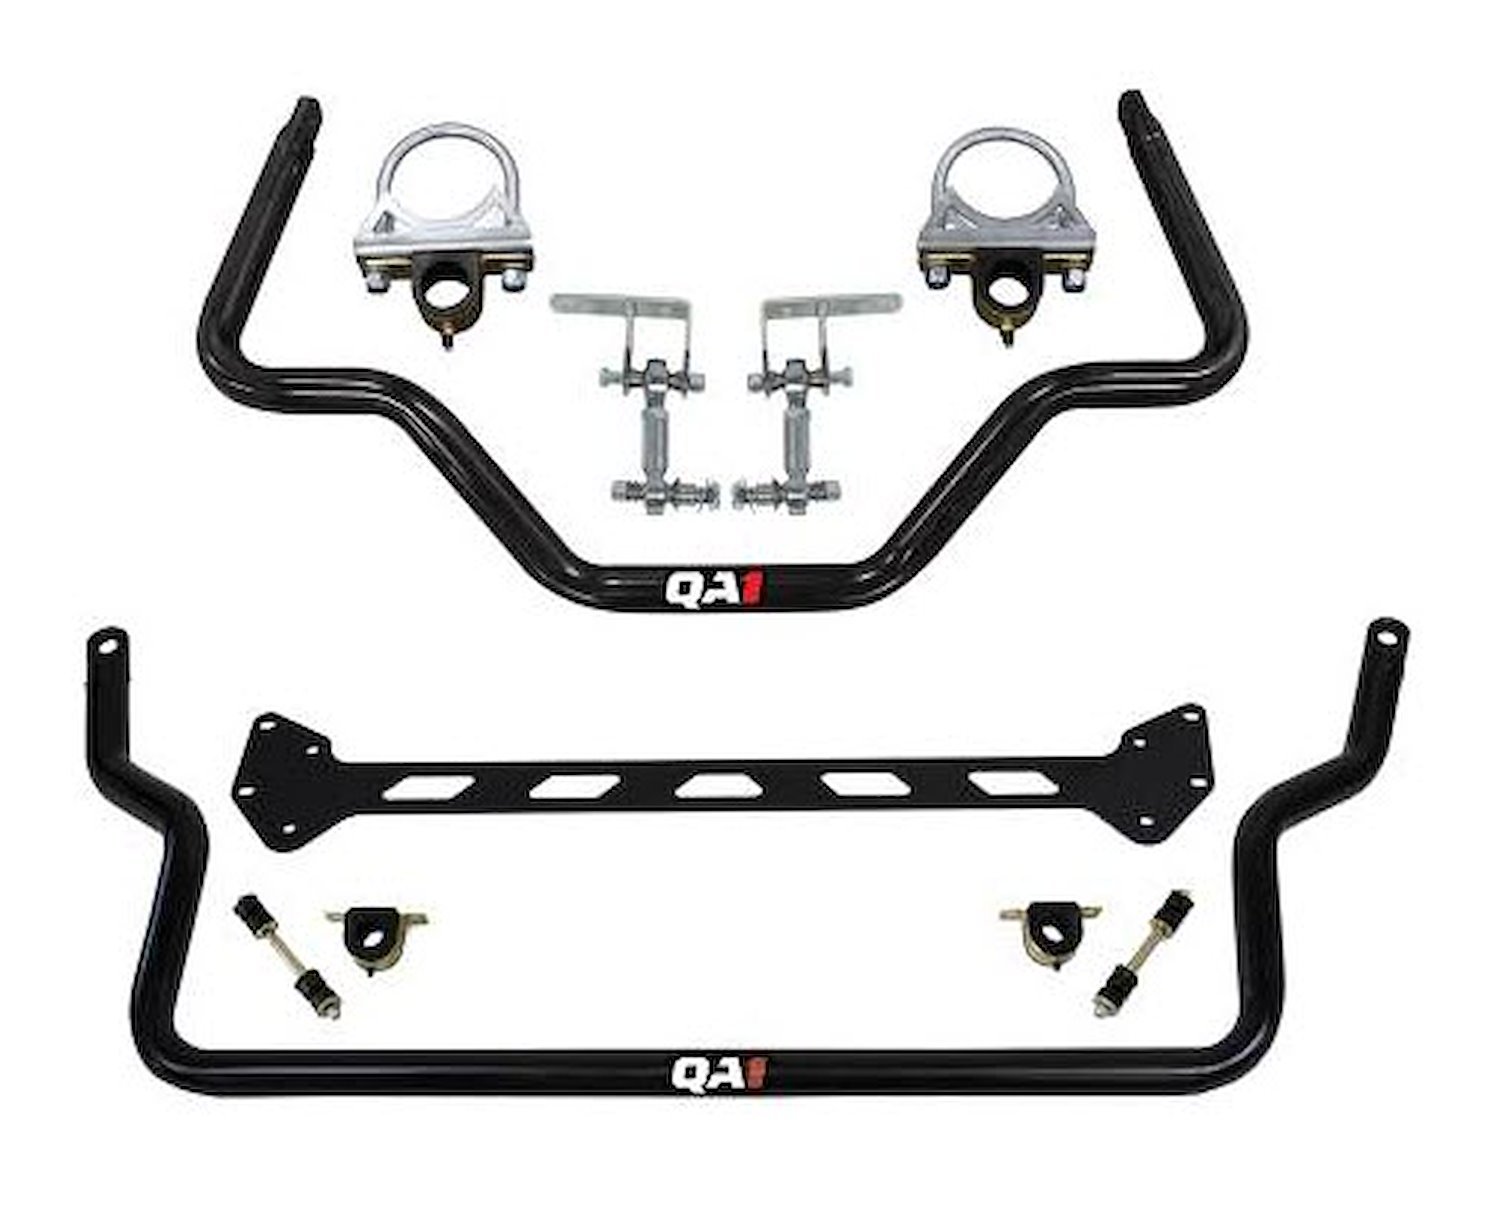 High Clearance Front and Axle Mount Rear Sway Bar Kit for 1978-1988 GM G-Body Cars